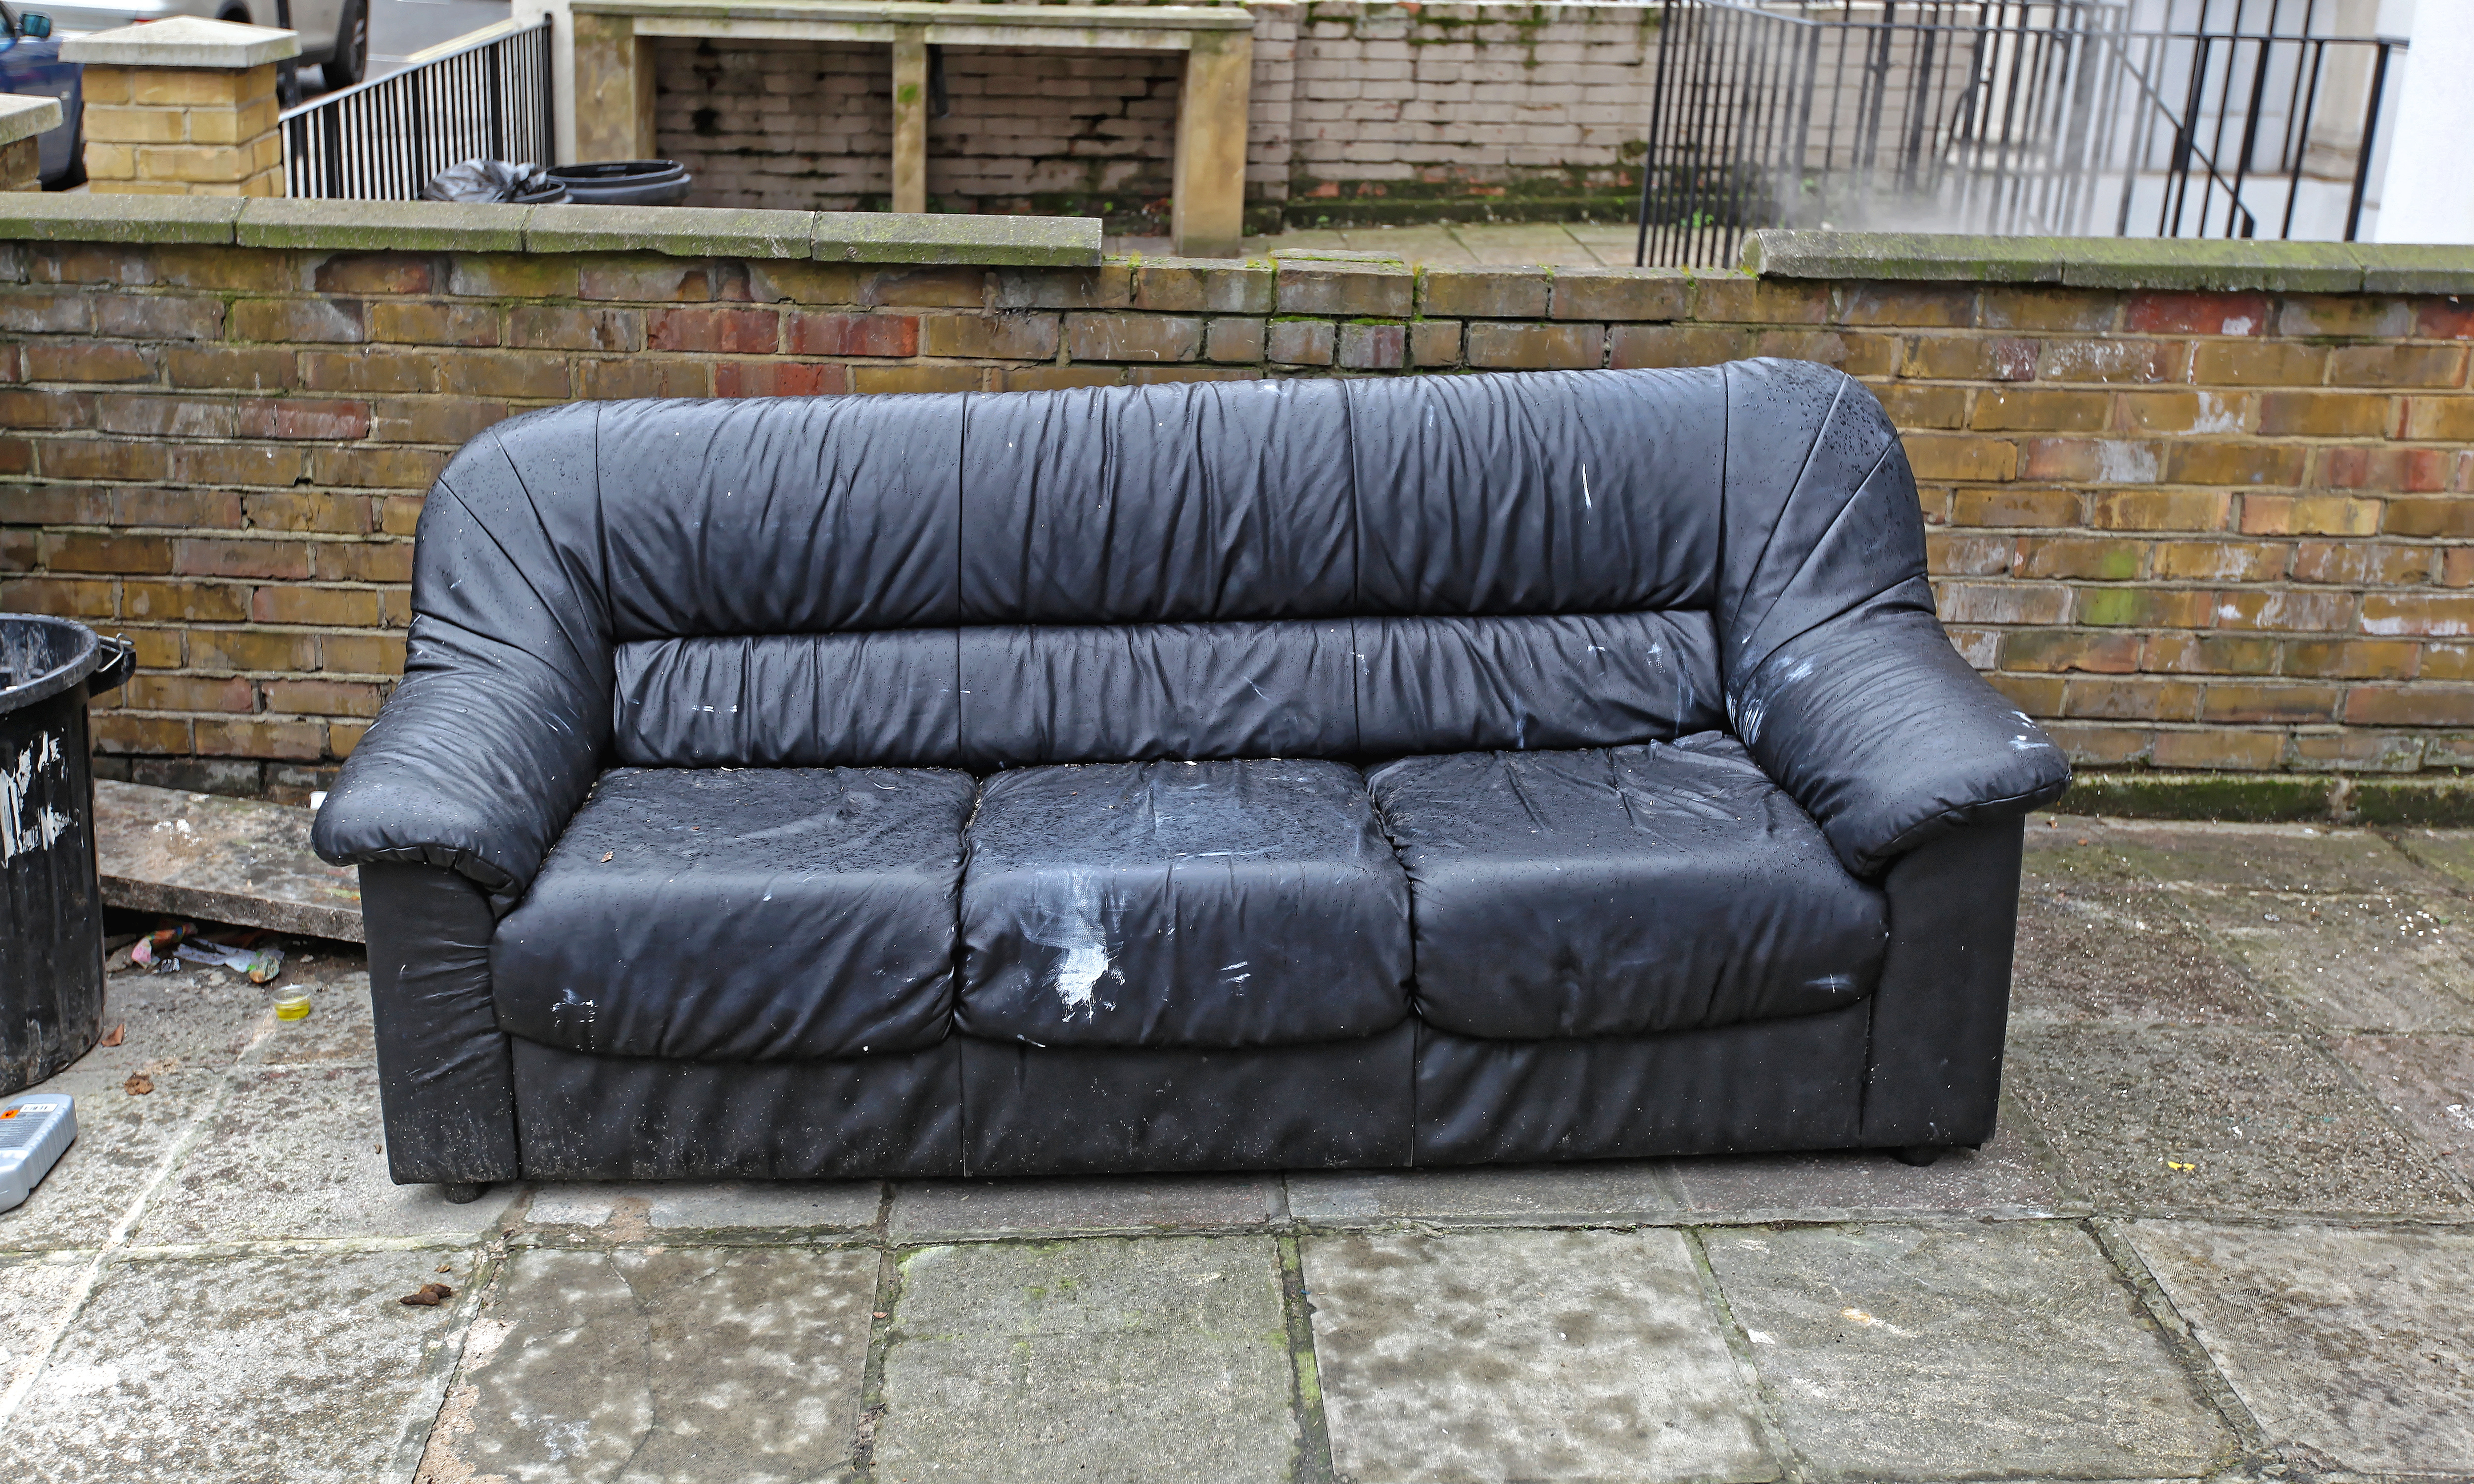 Environment Agency POPs enforcement stops council sofa collections